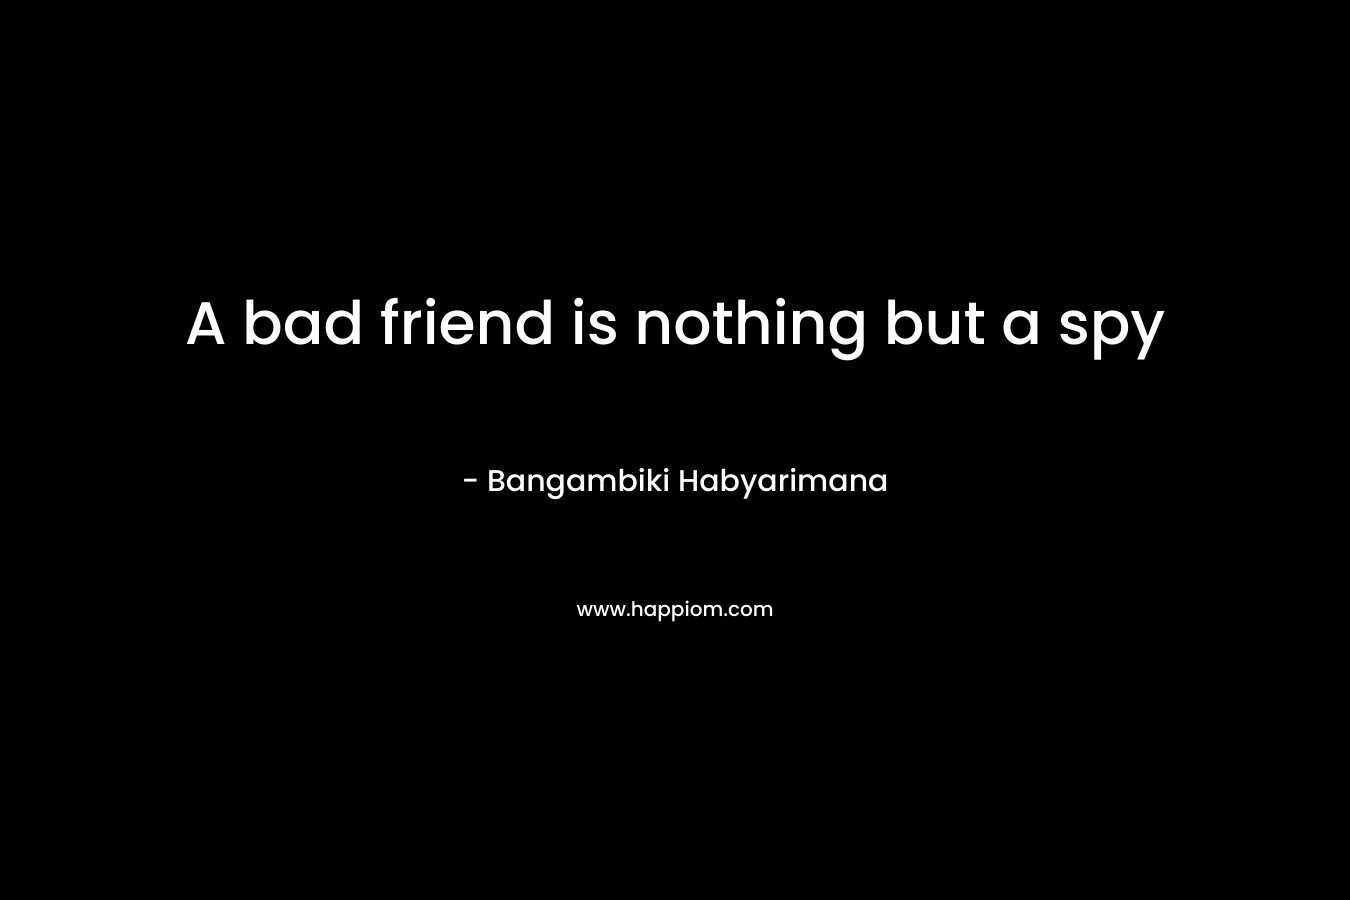 A bad friend is nothing but a spy